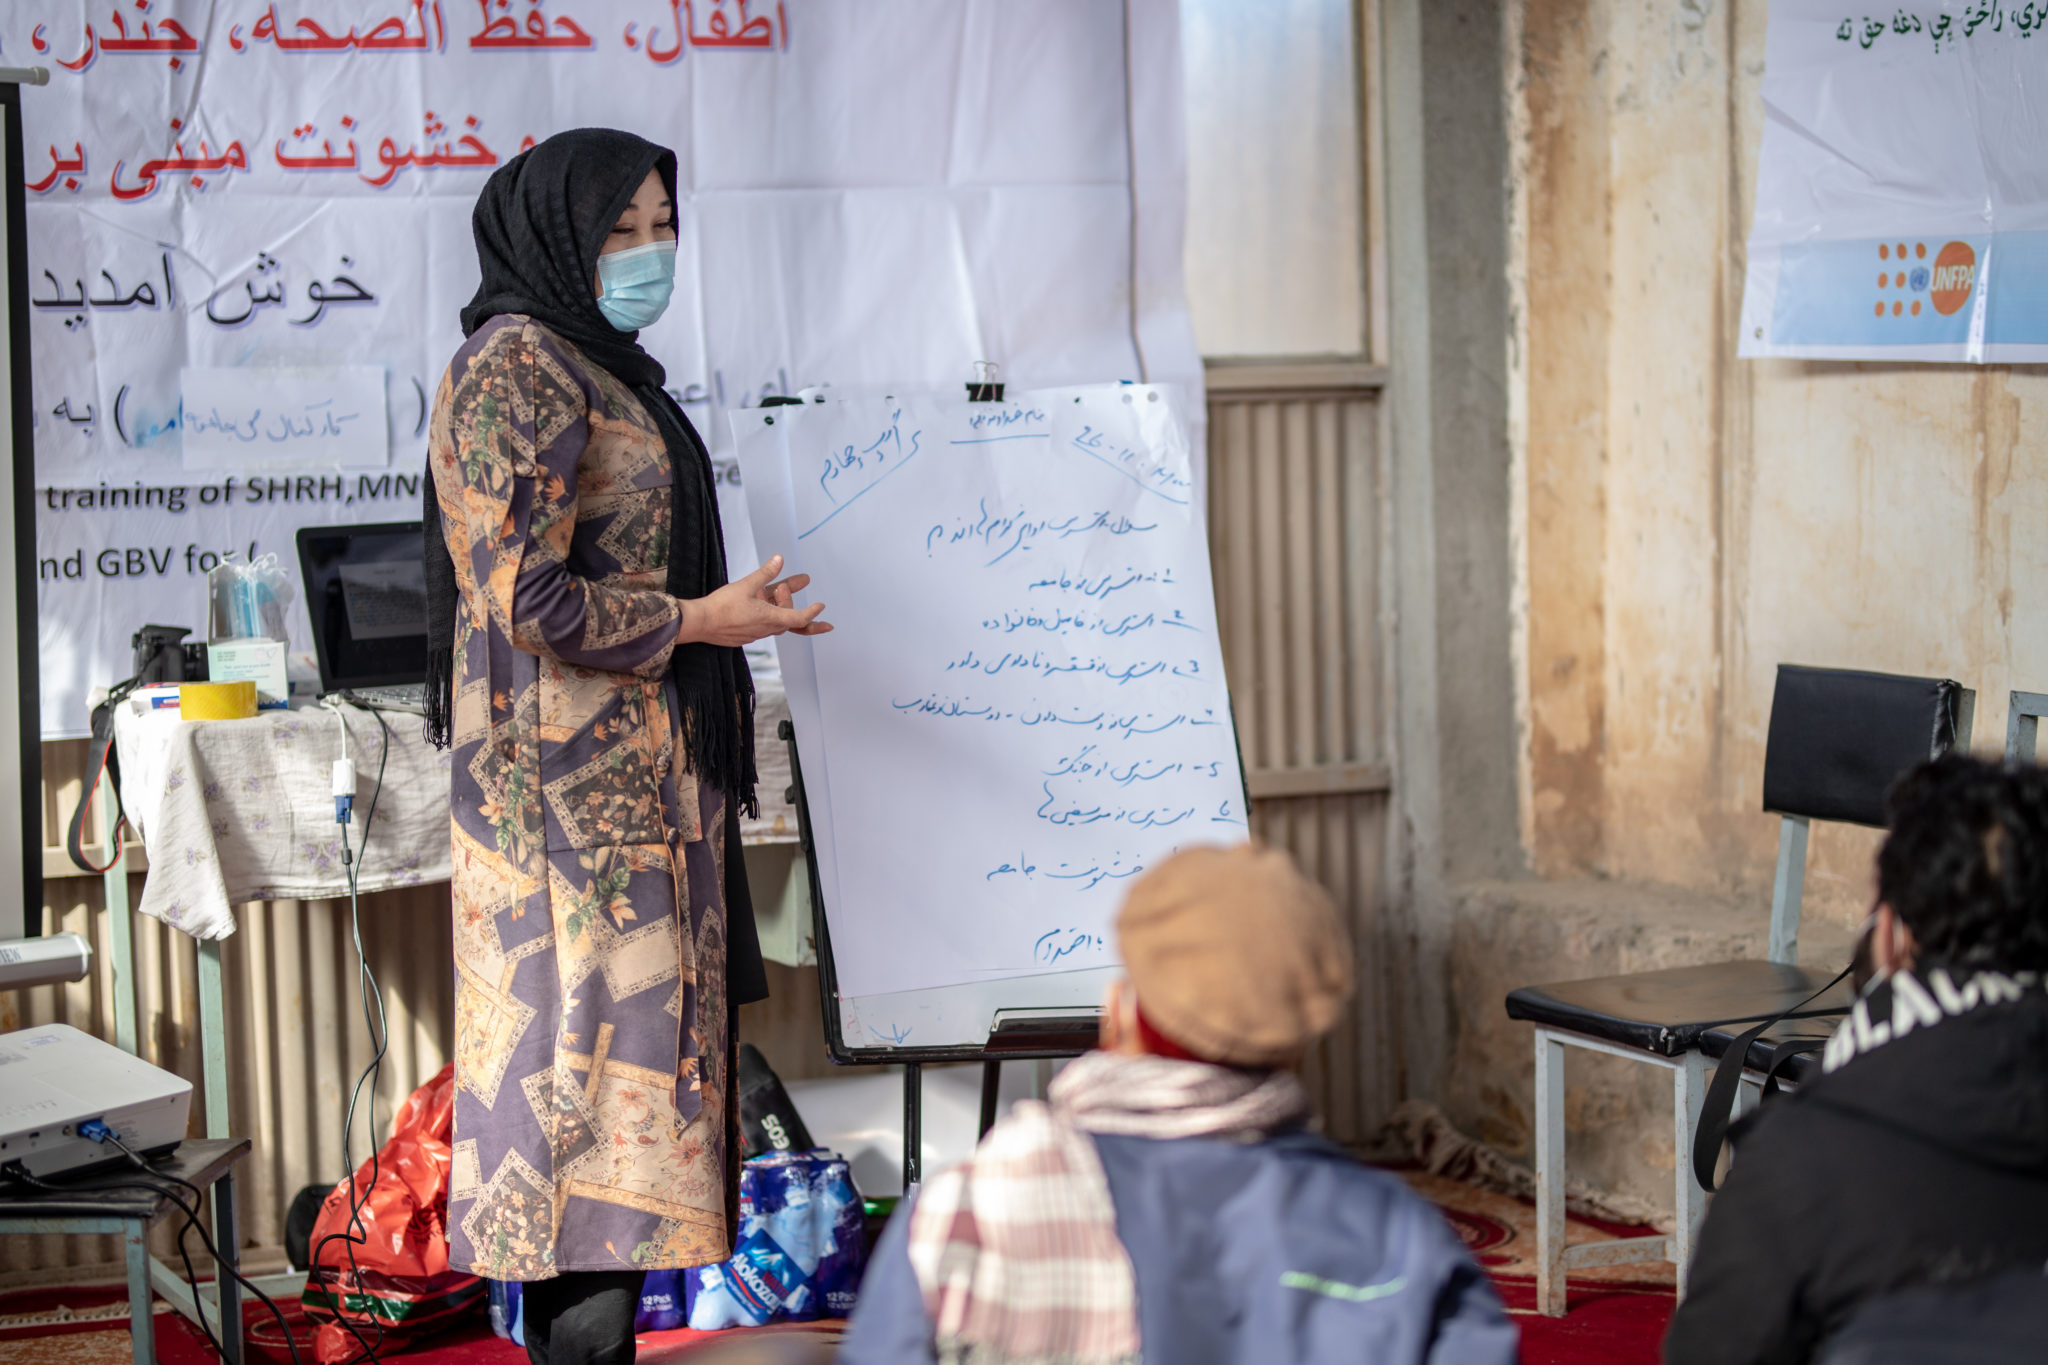 A woman wearing a medical mask, is standing in front of people and leading a health and hygiene training seminar.